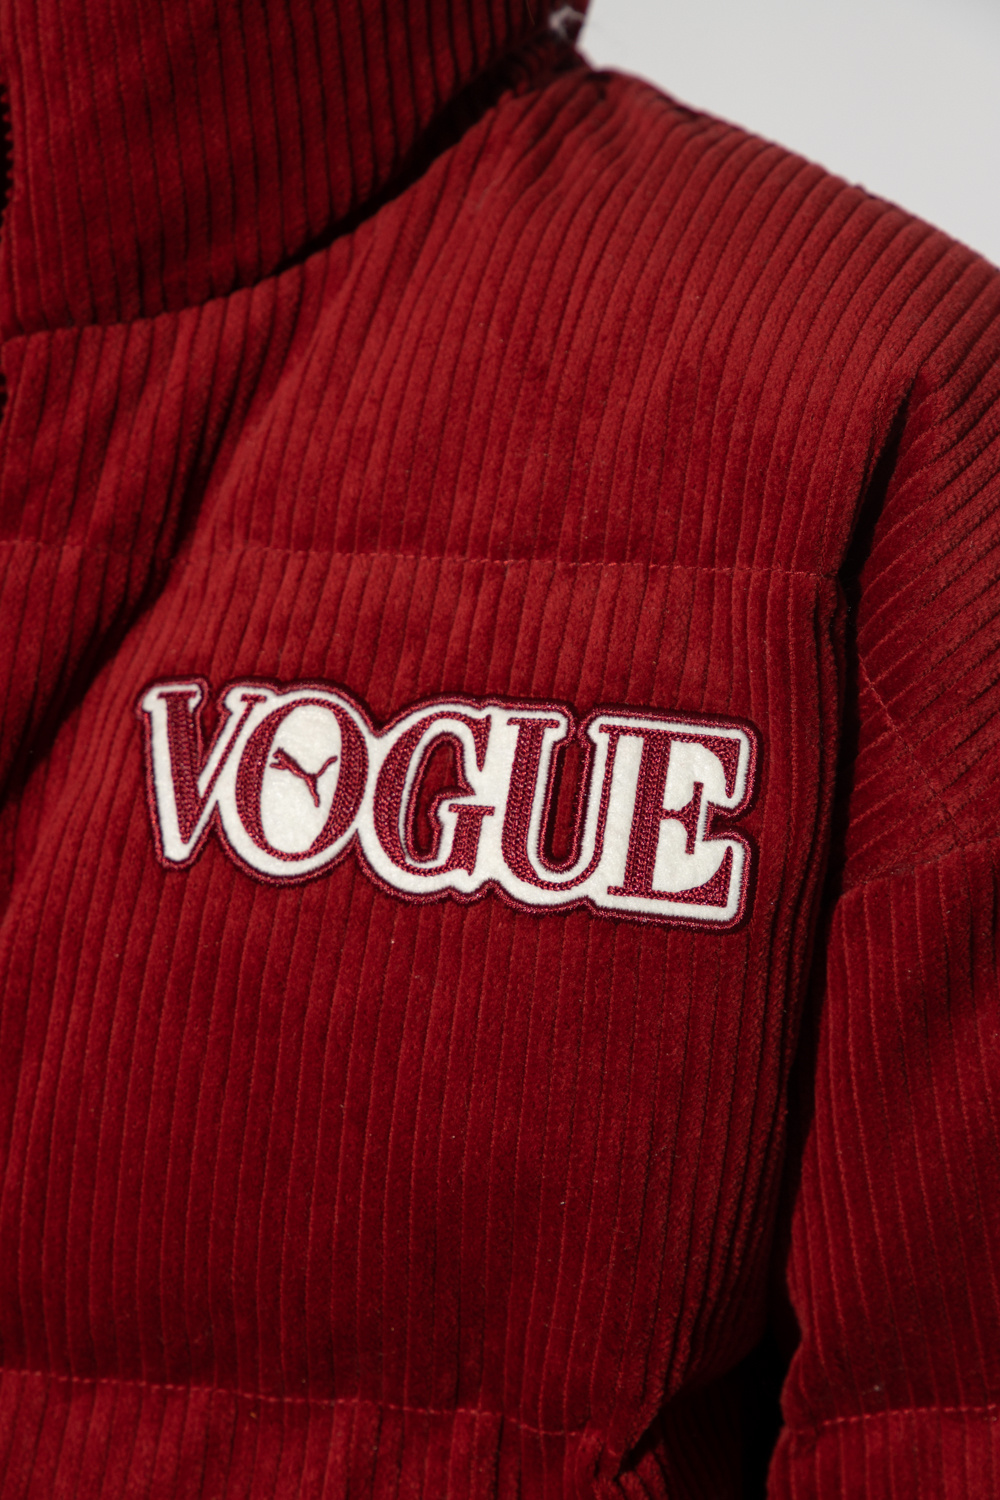 Vogue France on X: This Louis Vuitton sweater is now available